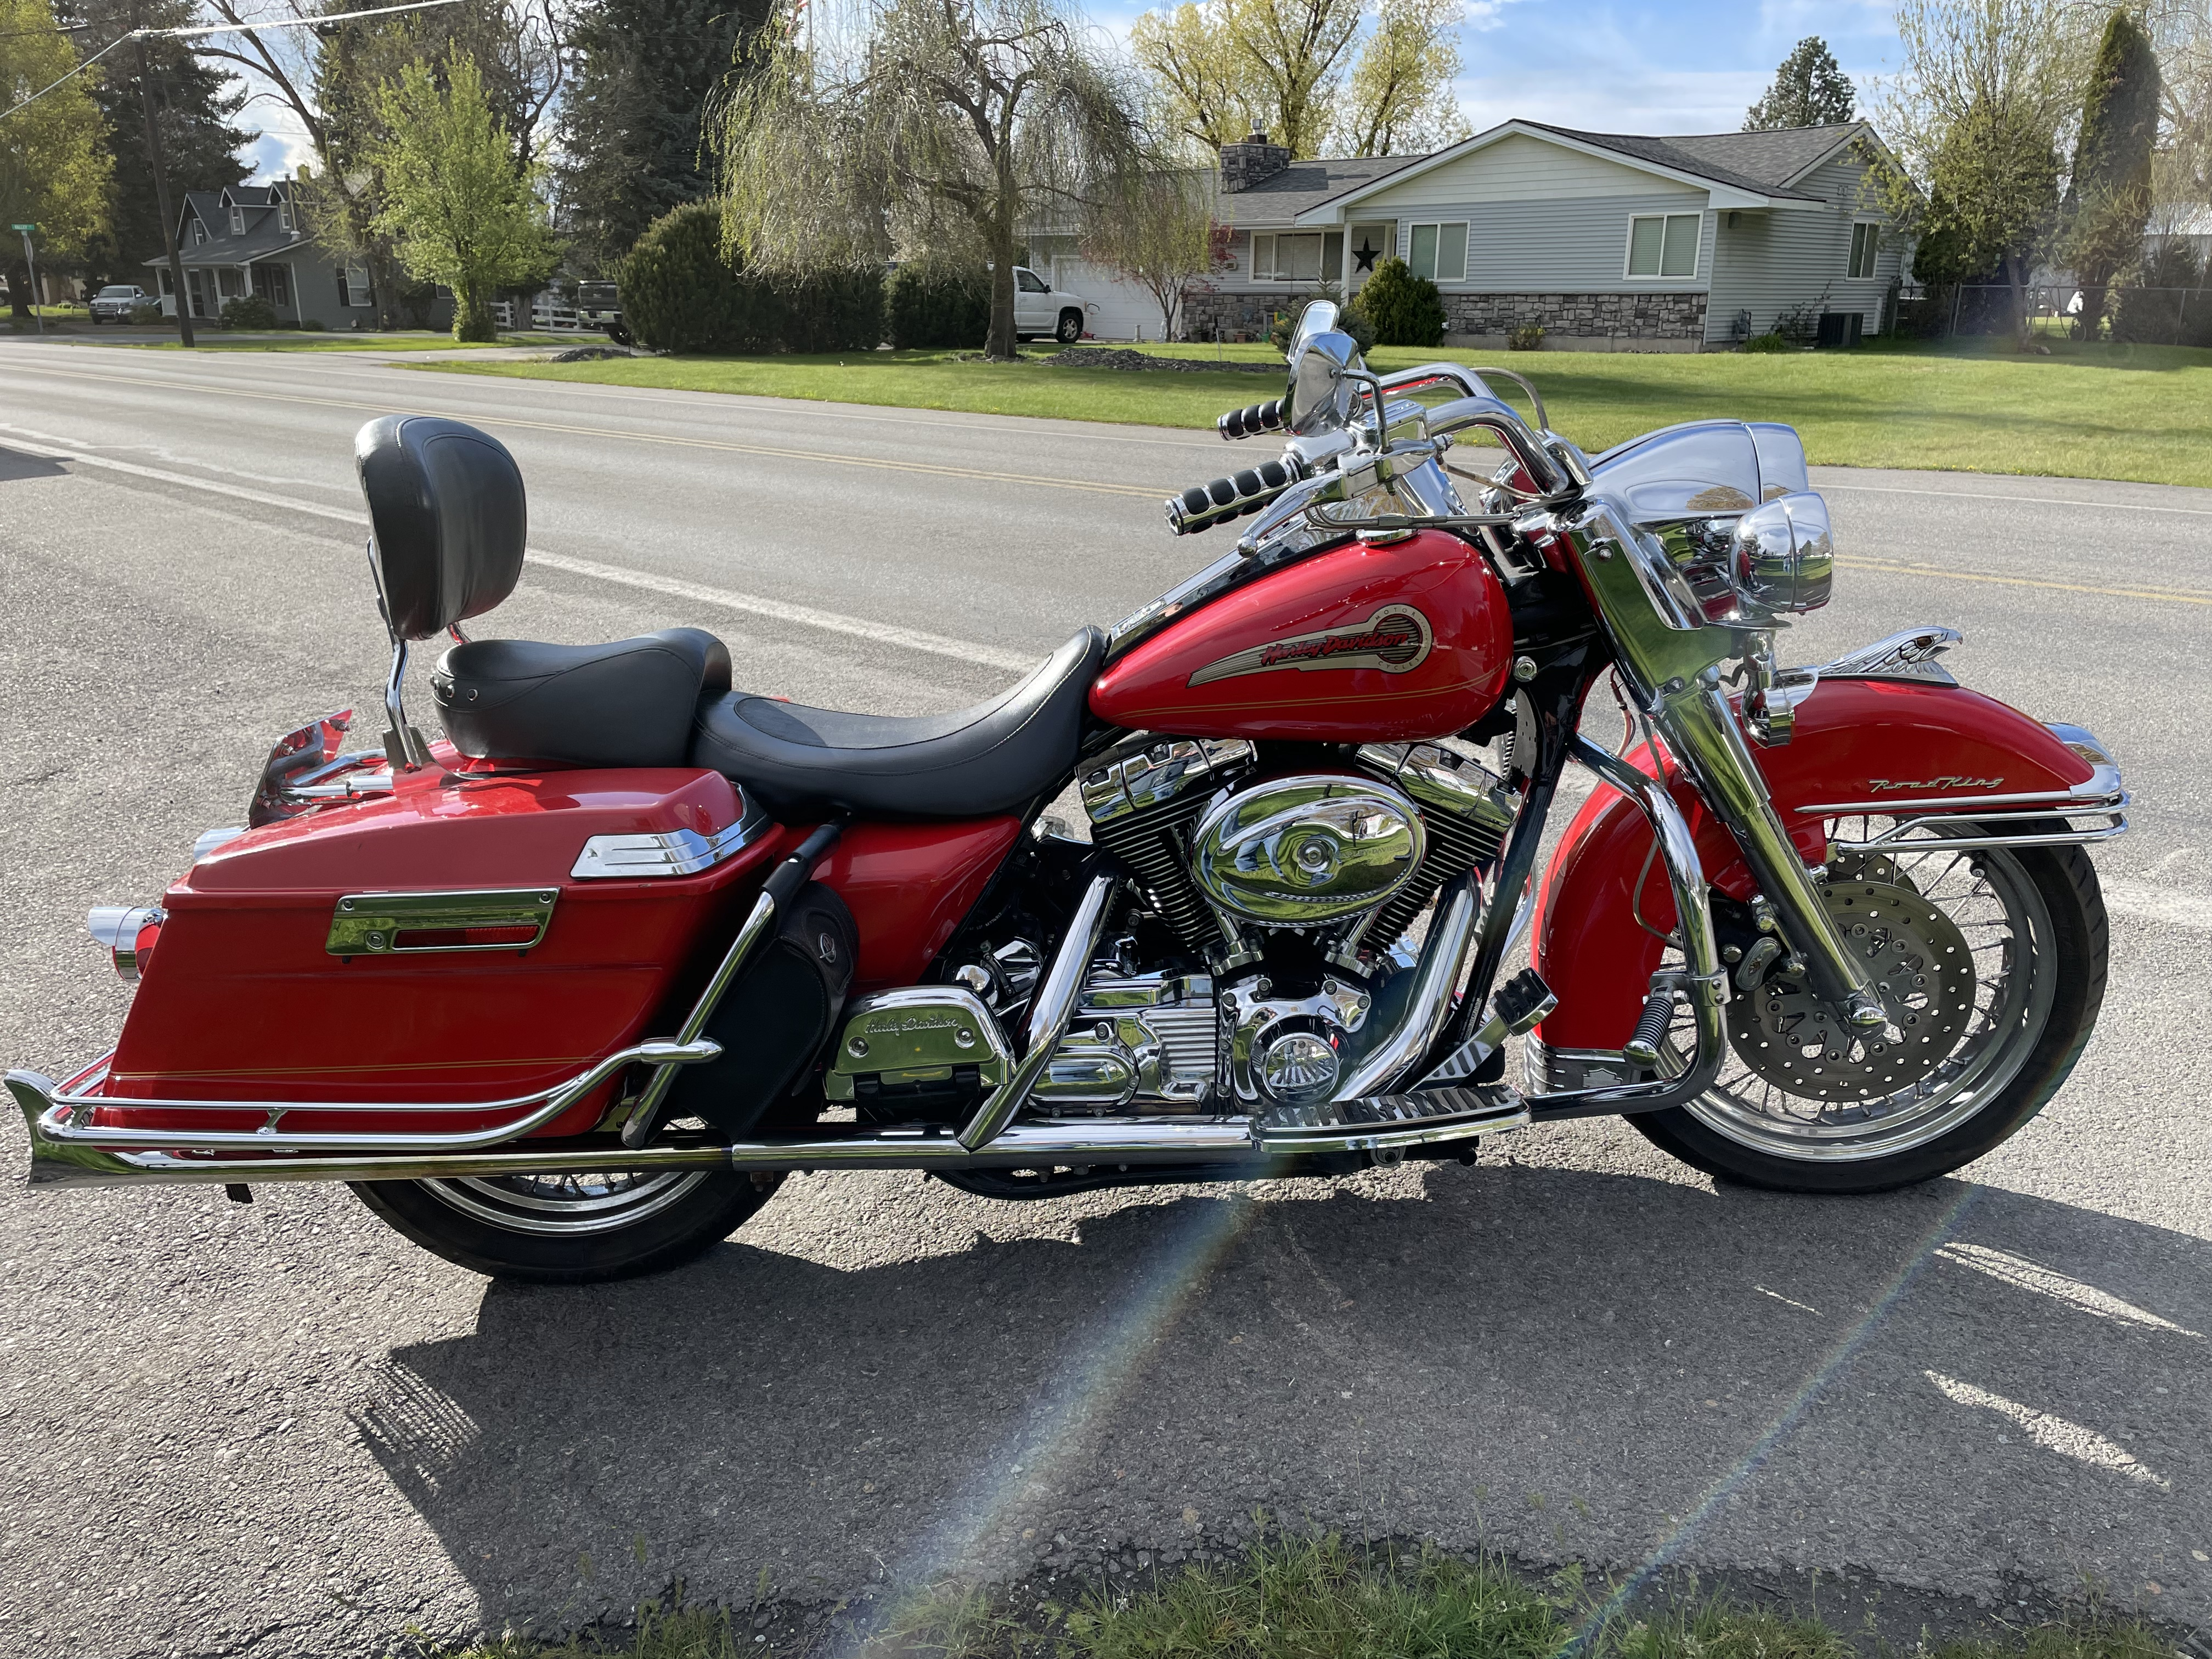 2002 Harley Fireman's Special Excellent  2002 Harley Fireman's Special Excellent condition, runs great. 20,700 miles $10,500 Call for more info. 208-659-6779 Dalton